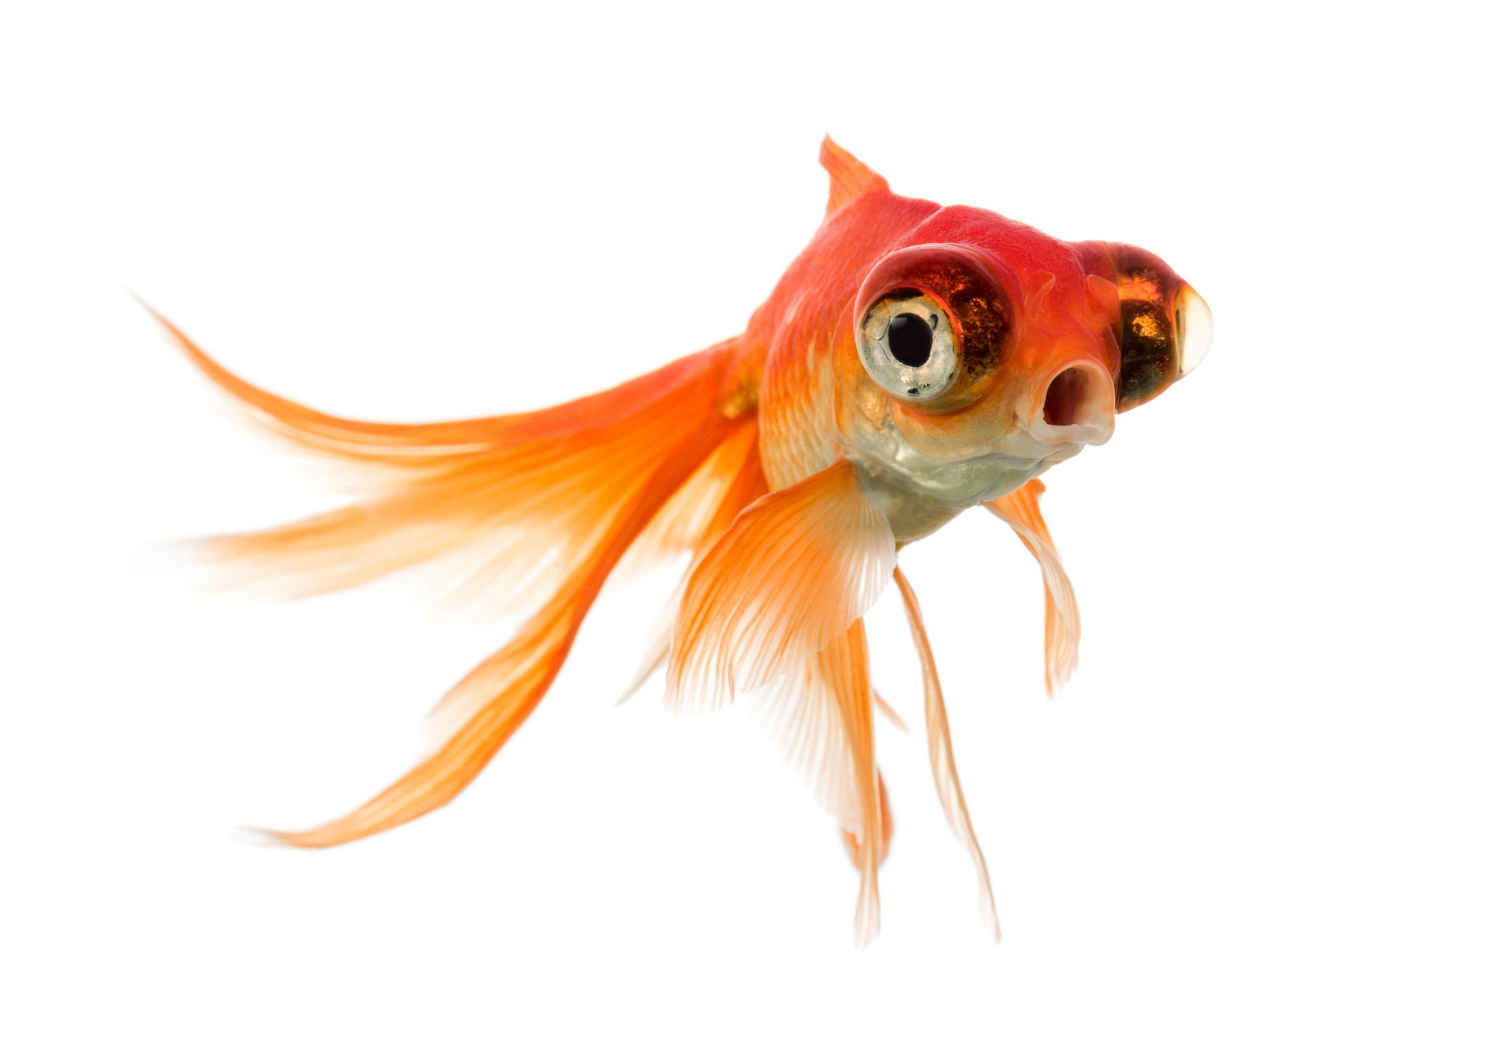 How do you know if your fish is stressed?